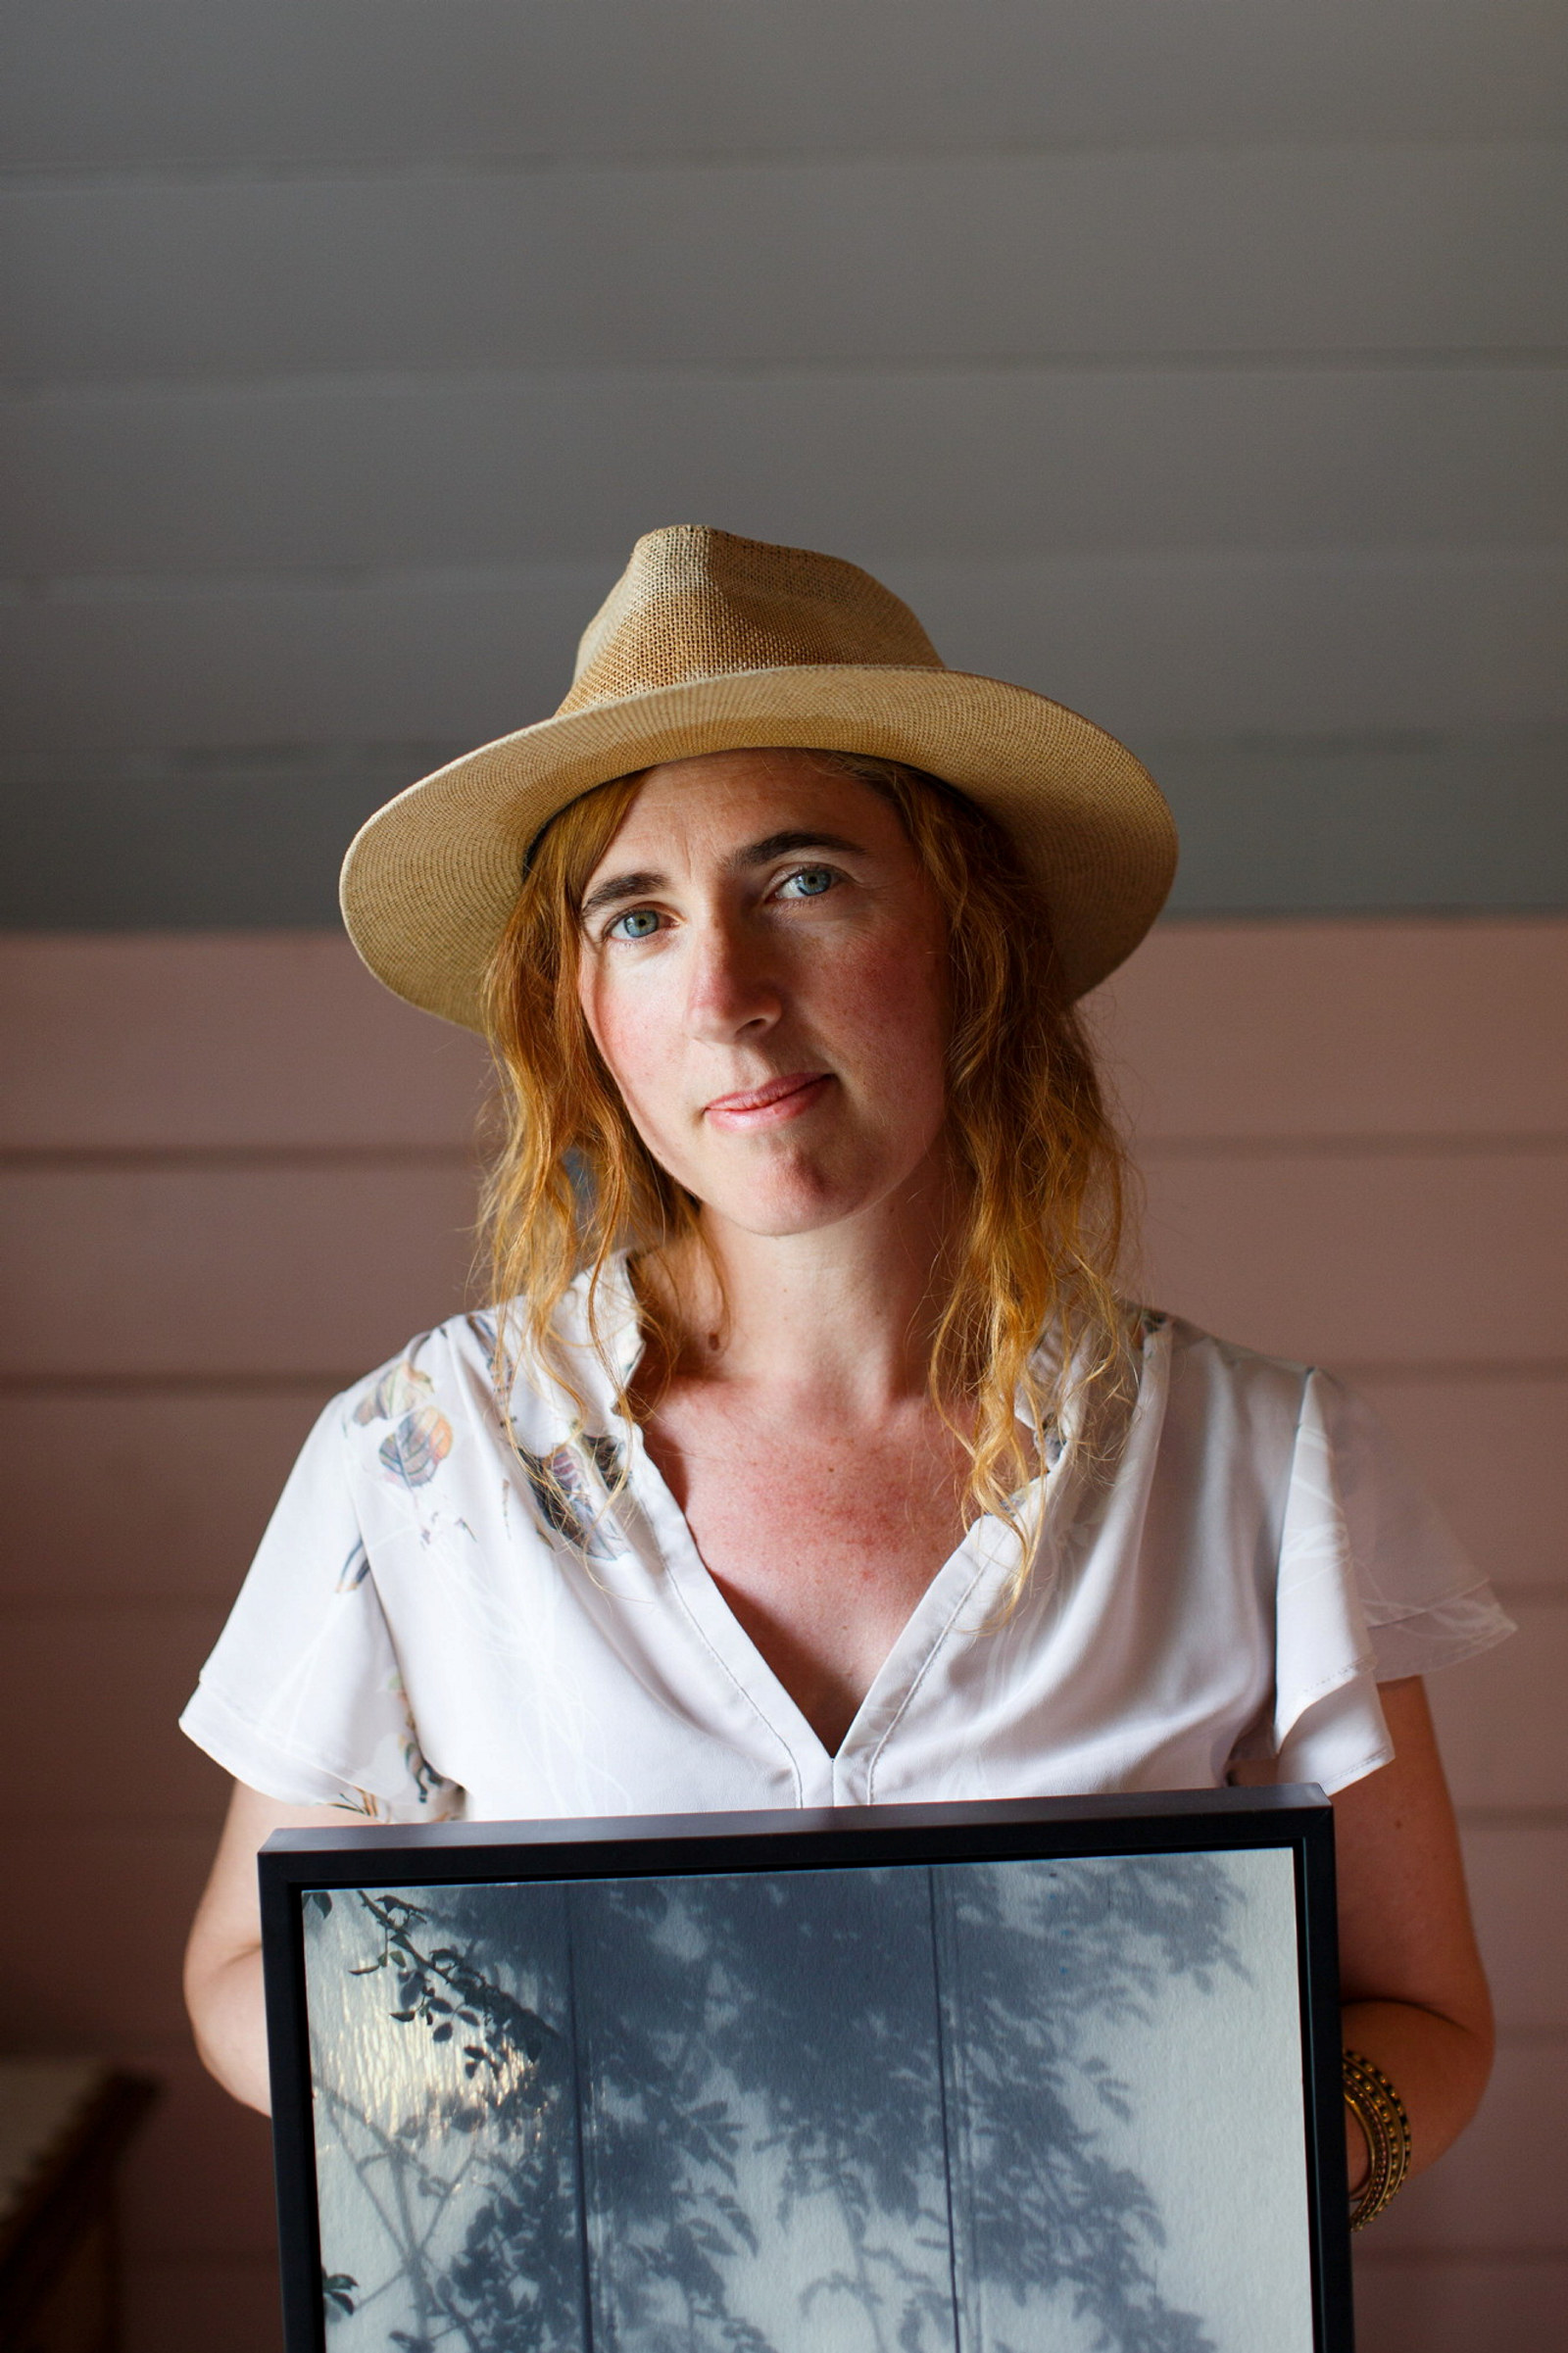 Women in straw hat and white shirt holding photographic artwork